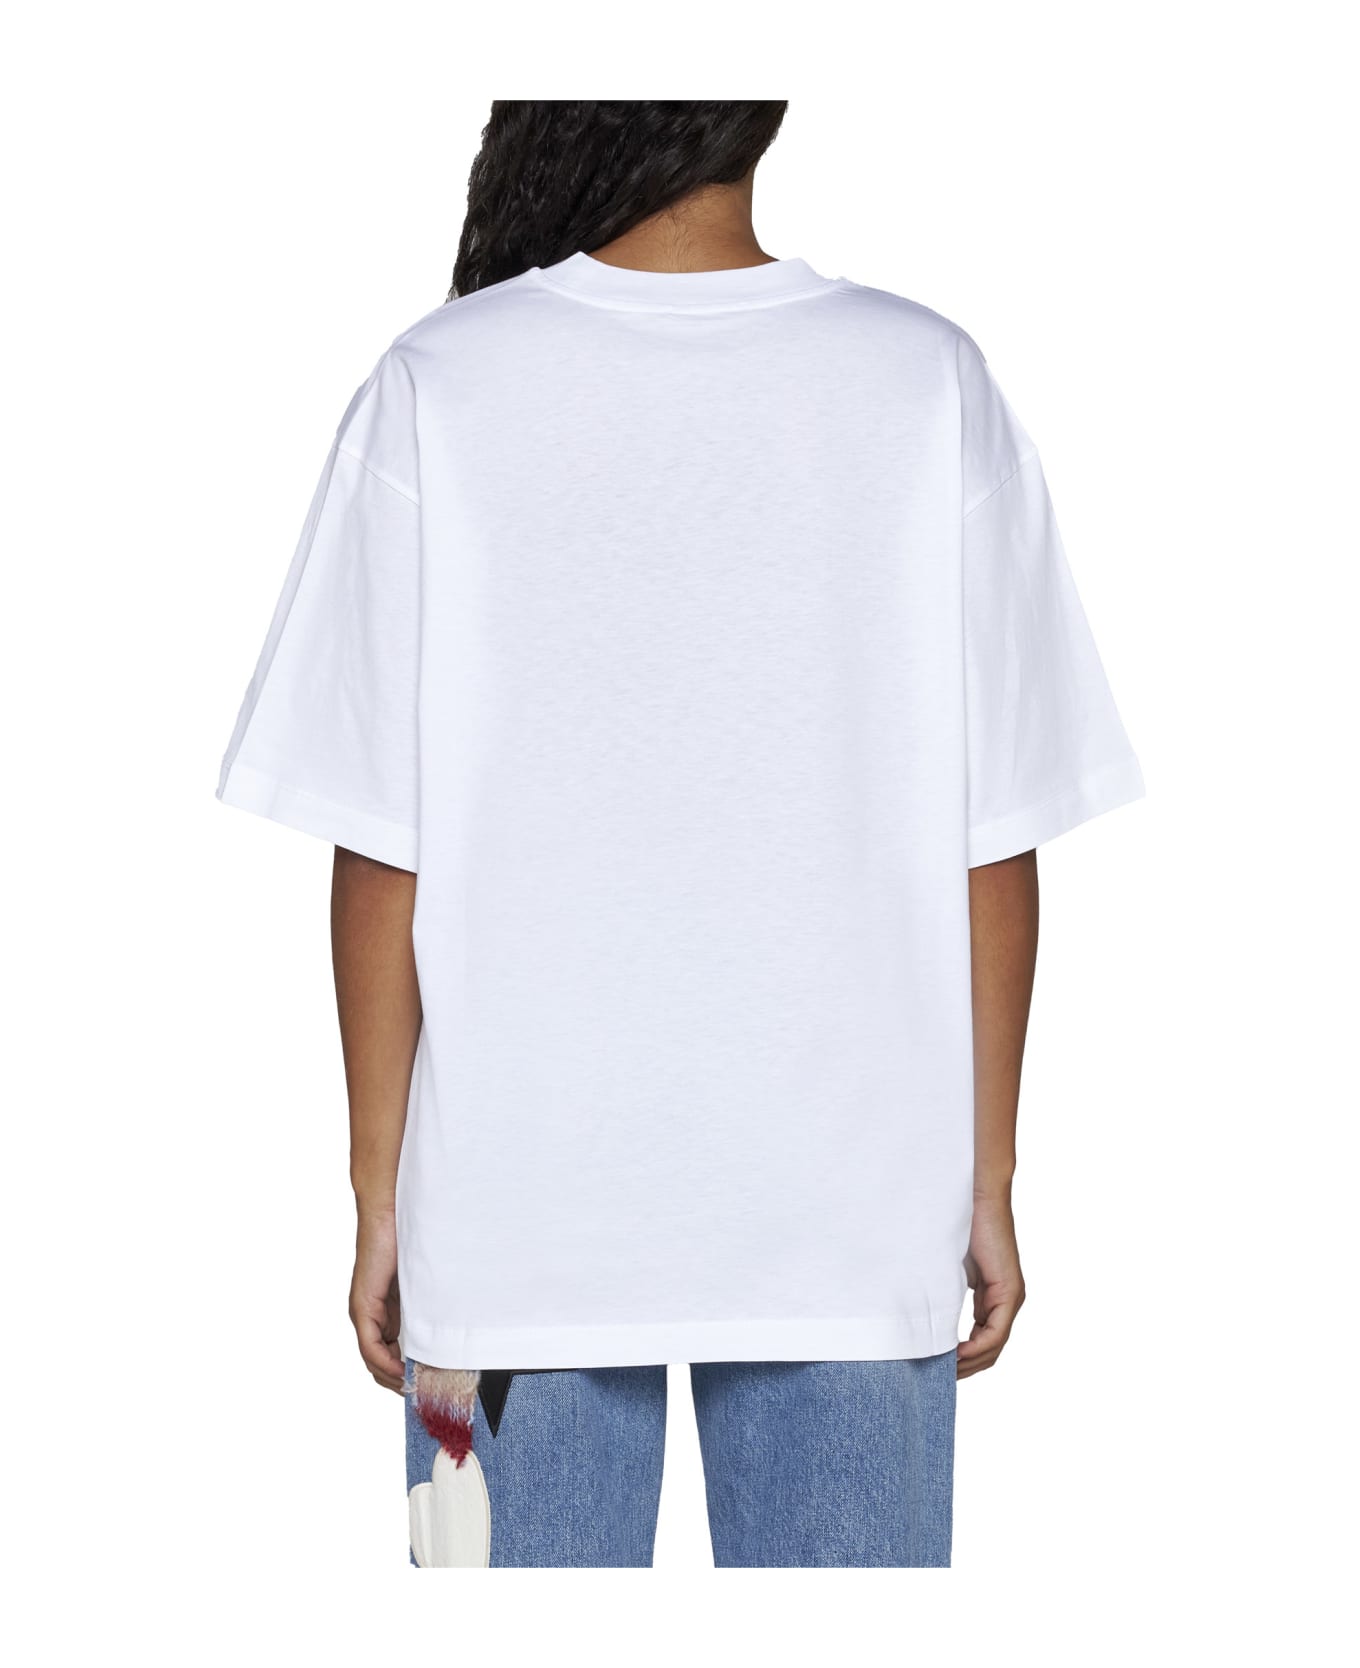 Marni White Cotton T-shirt - CLW01 Tシャツ